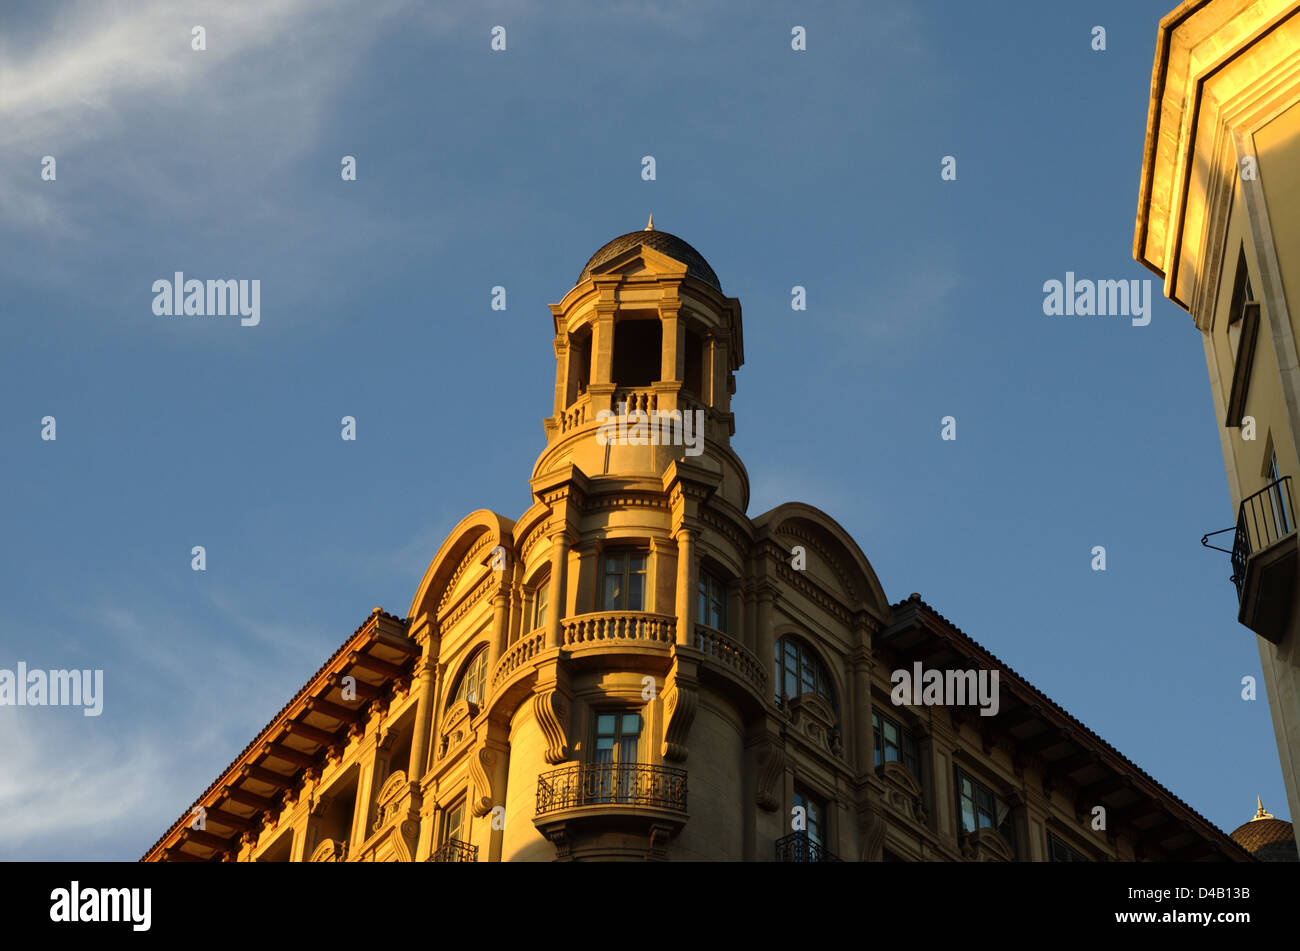 A building of the Via Layetana of Barcelona at evening. Stock Photo